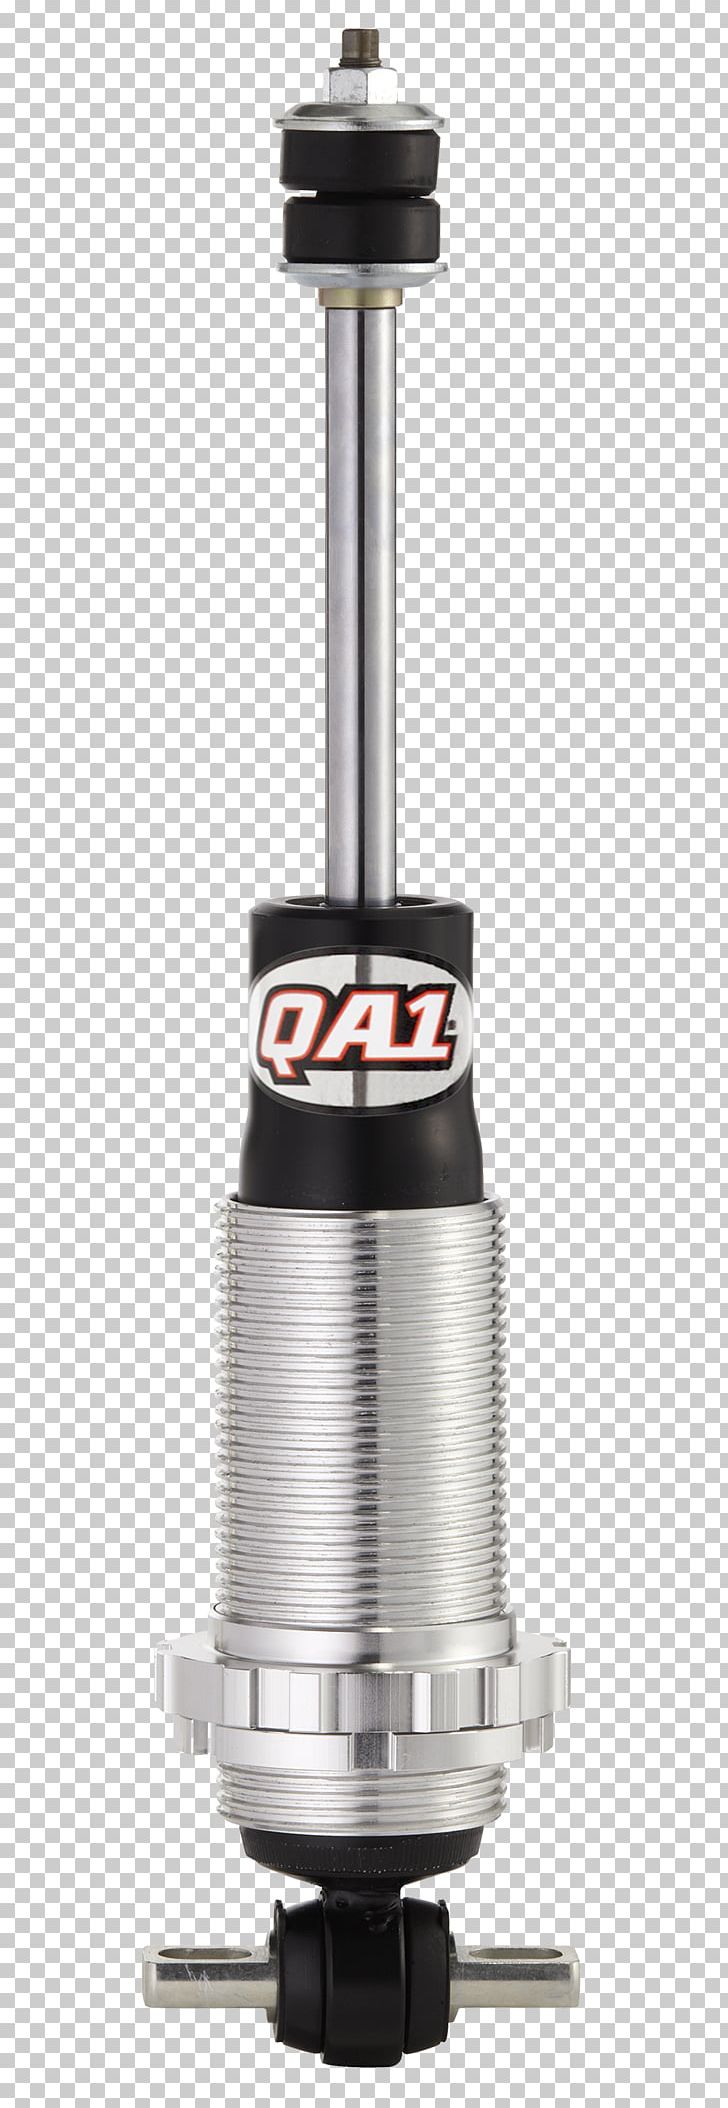 General Motors Coilover Chevrolet Car Shock Absorber PNG, Clipart, Angle, Car, Cars, Chevrolet, Chevrolet Chevelle Free PNG Download